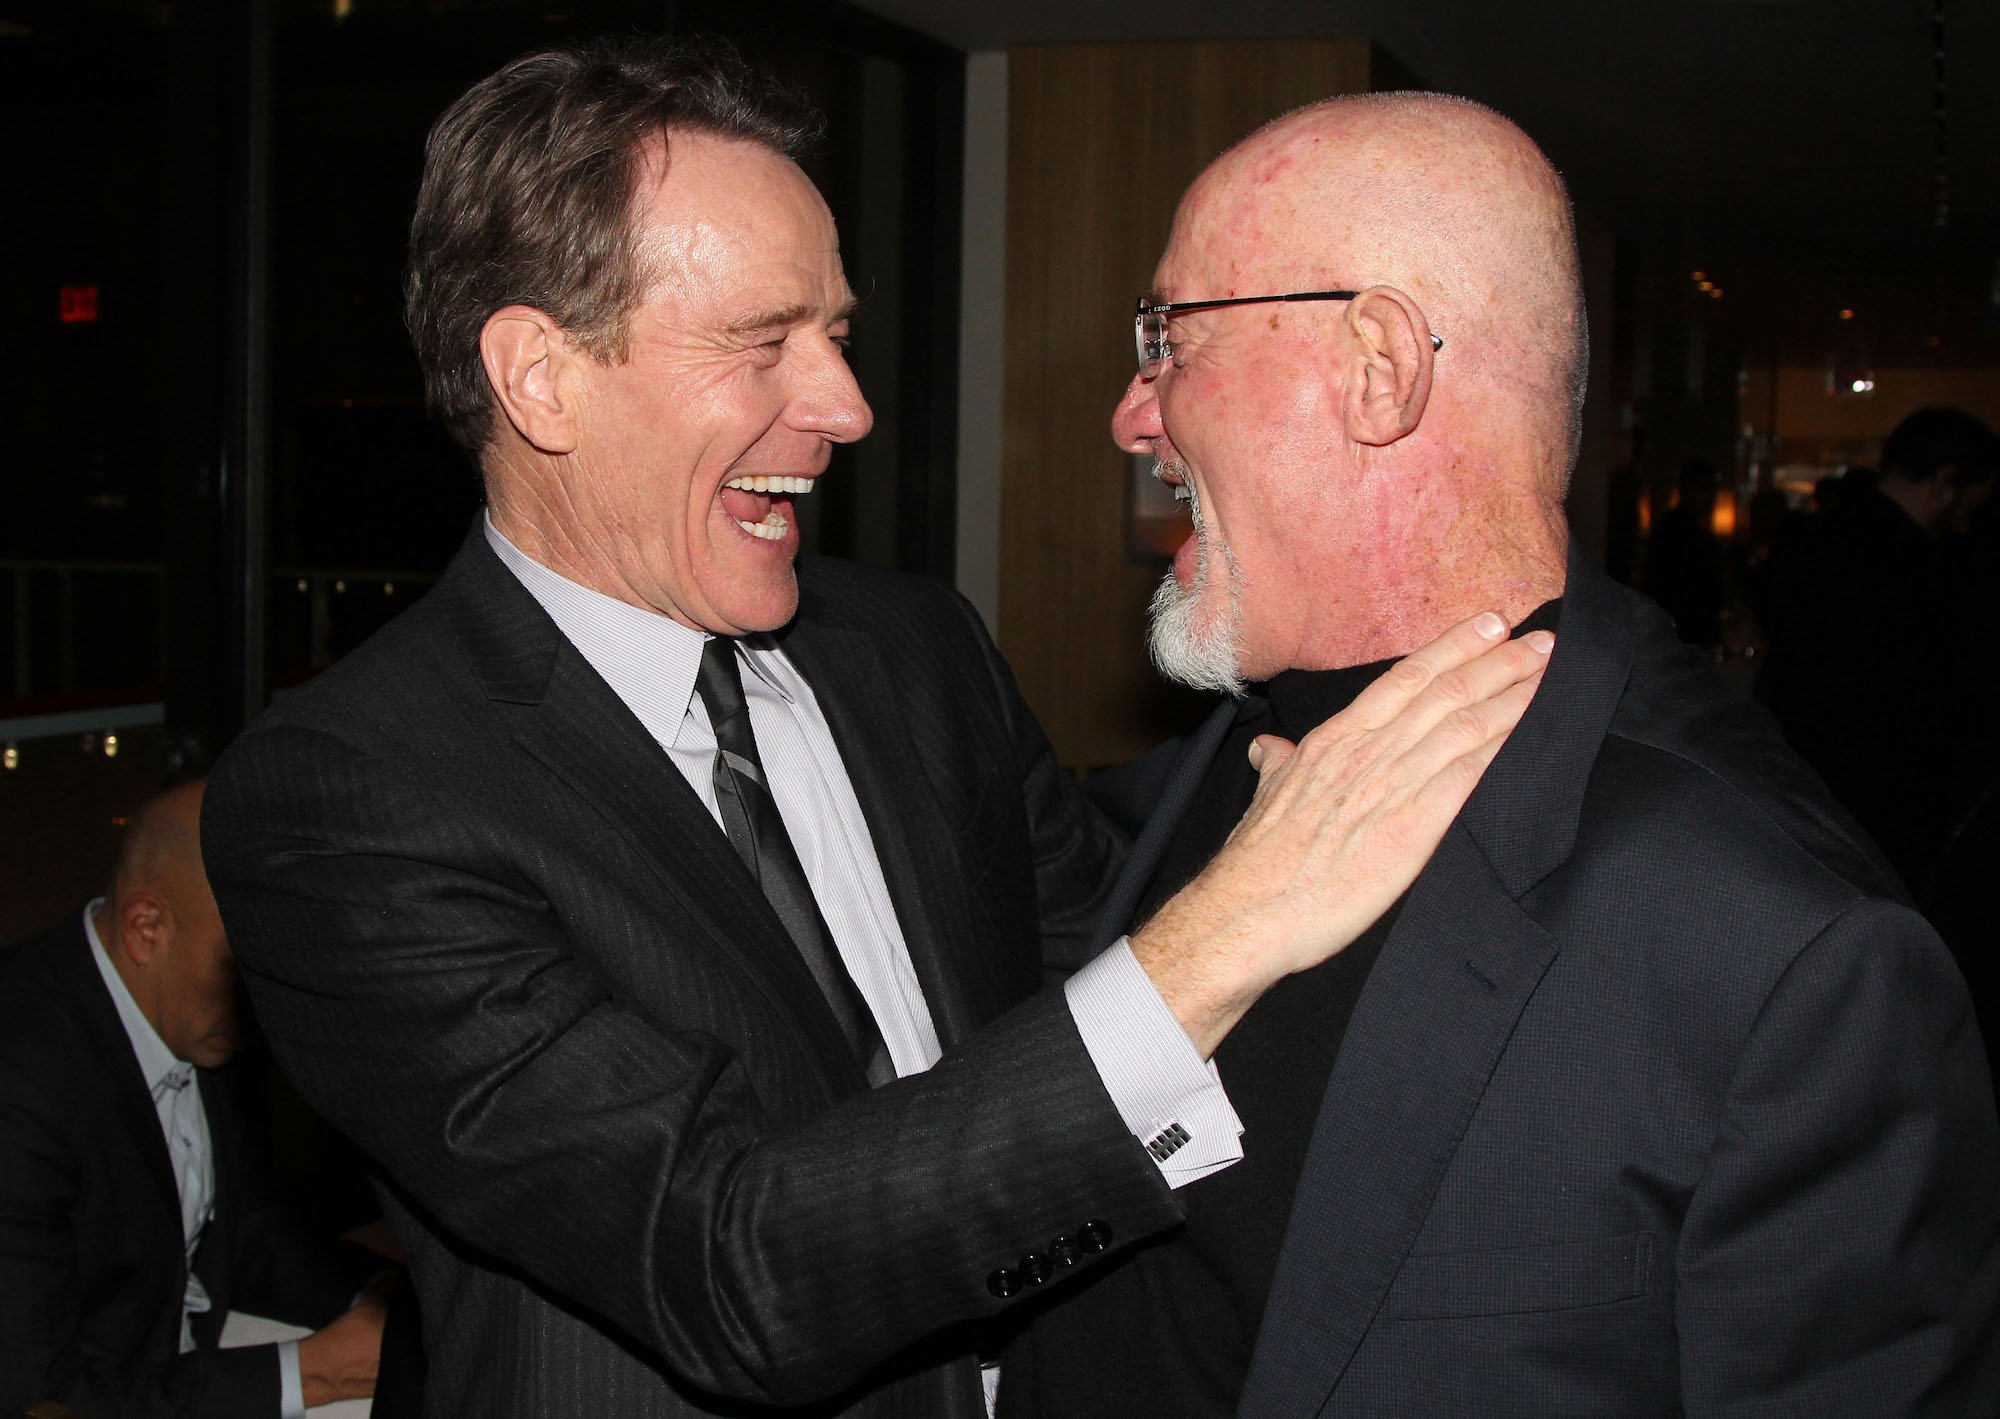 Bryan Cranston and Jonathan Banks turned to each other, smiling and laughing